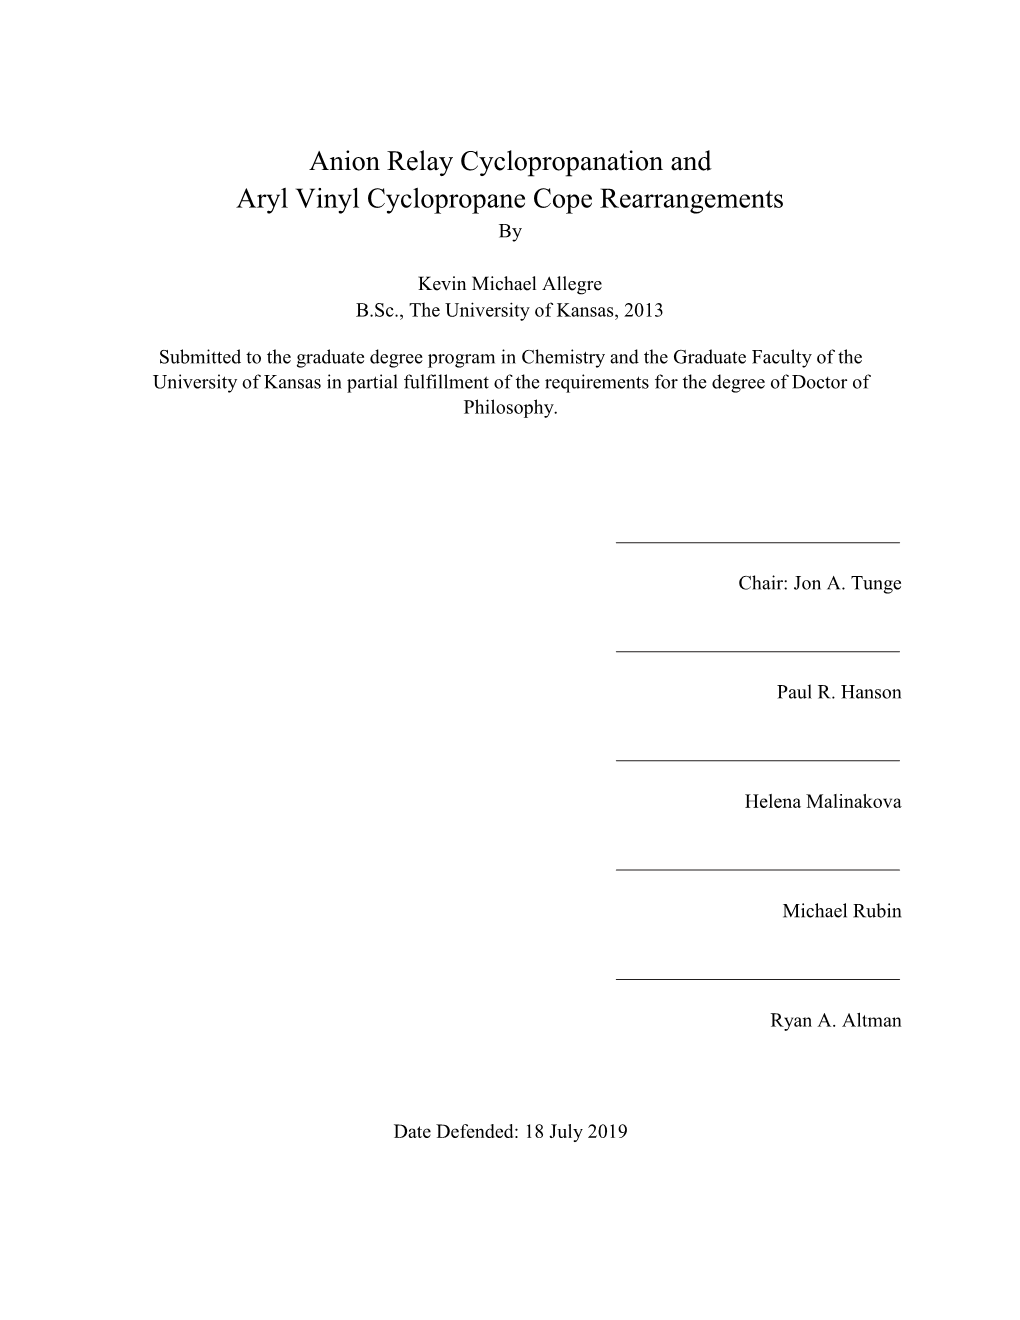 Anion Relay Cyclopropanation and Aryl Vinyl Cyclopropane Cope Rearrangements By